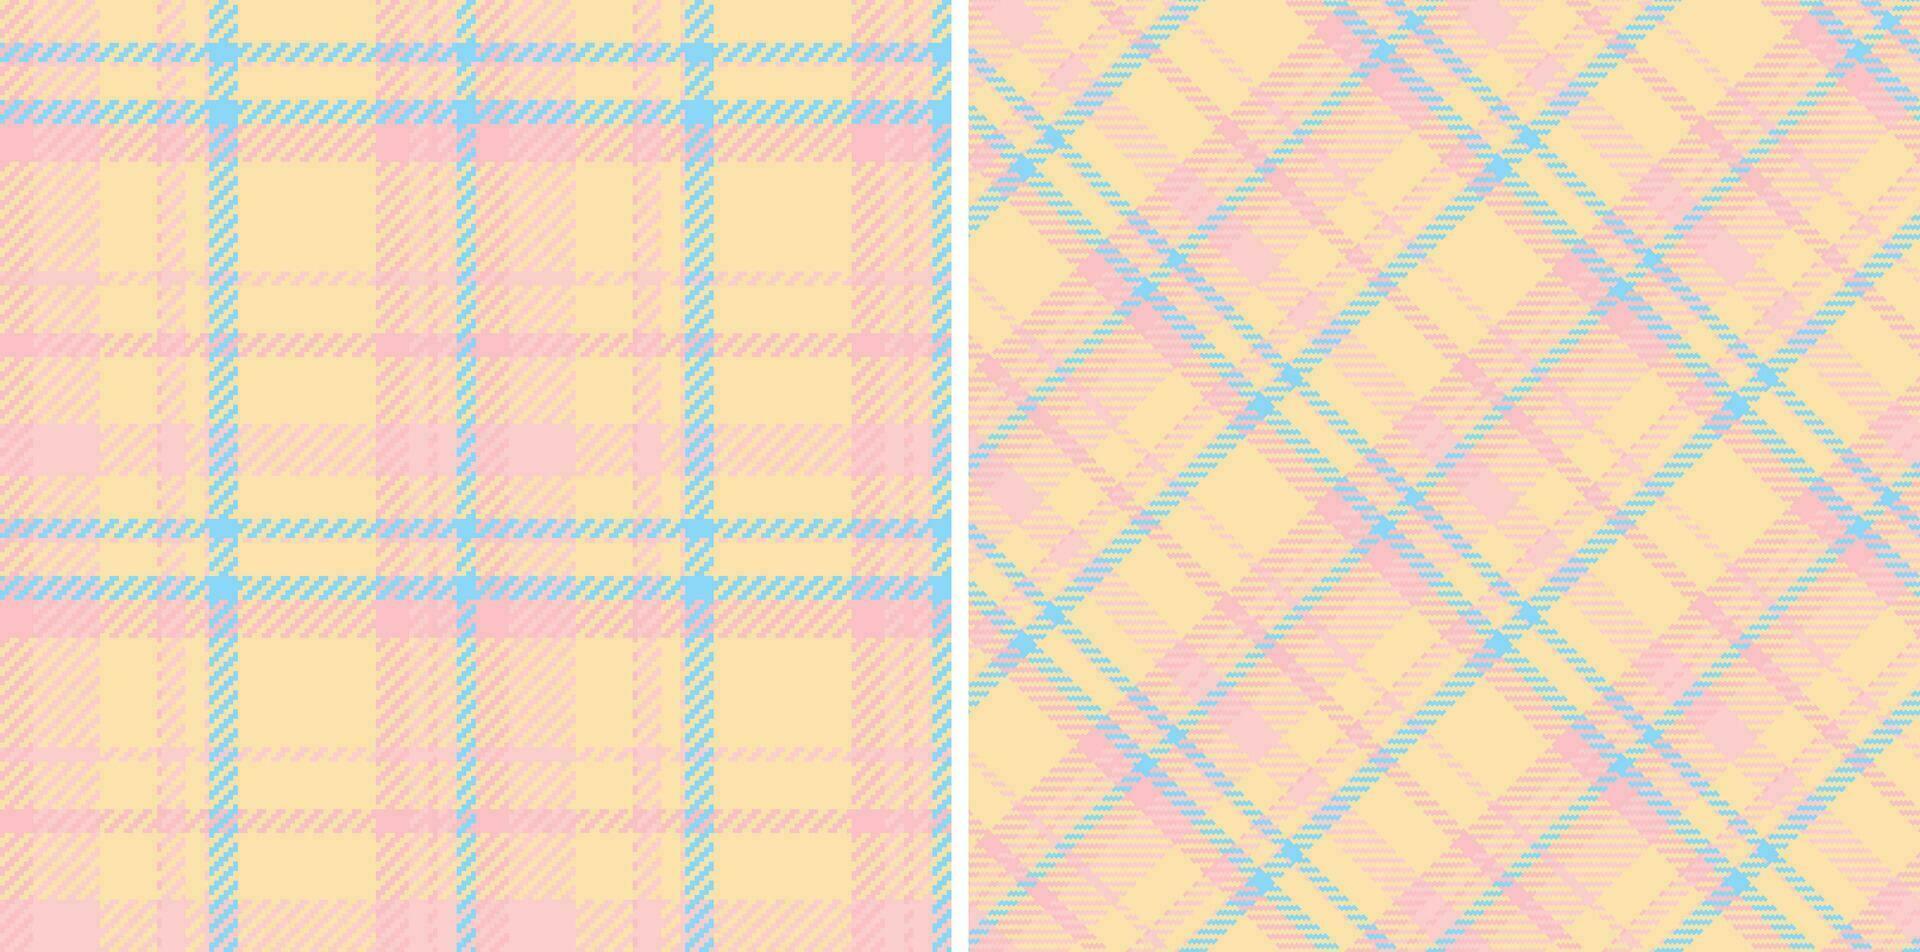 Fabric seamless check of pattern vector tartan with a textile background plaid texture.